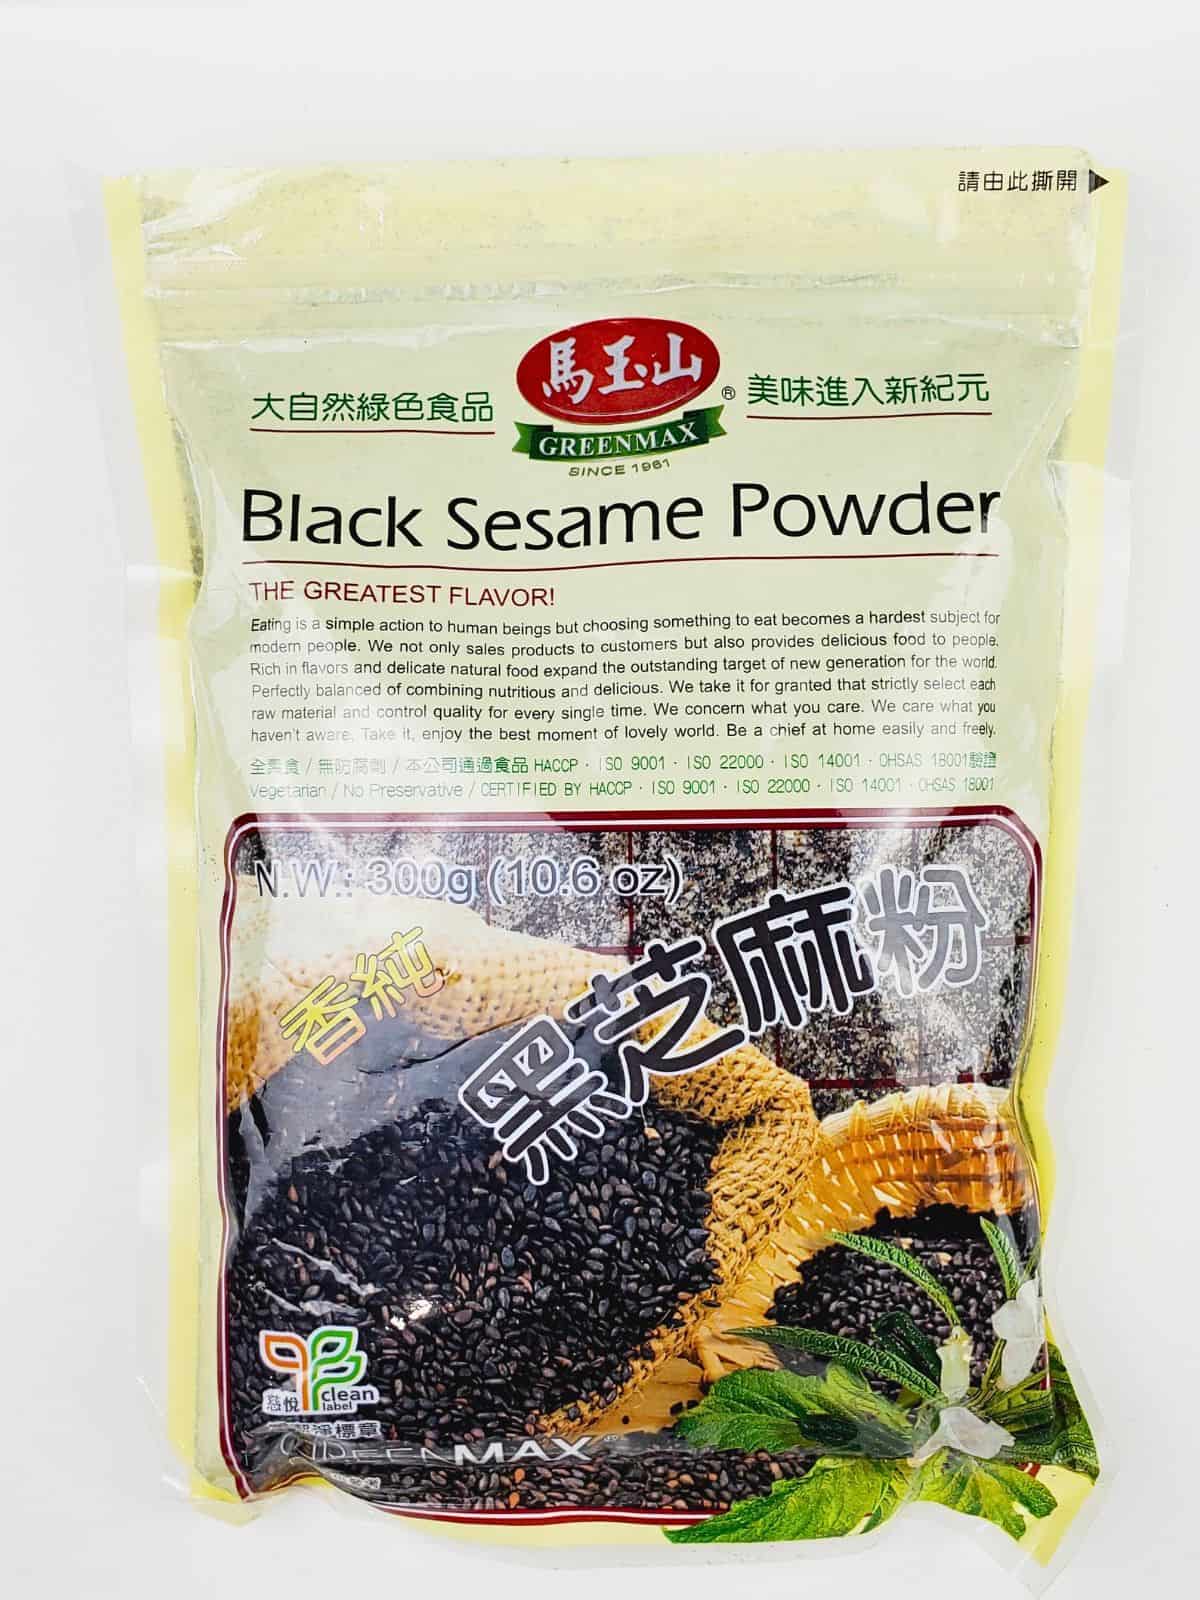 a pack of 300 grams of black sesame powder from Greenmax.